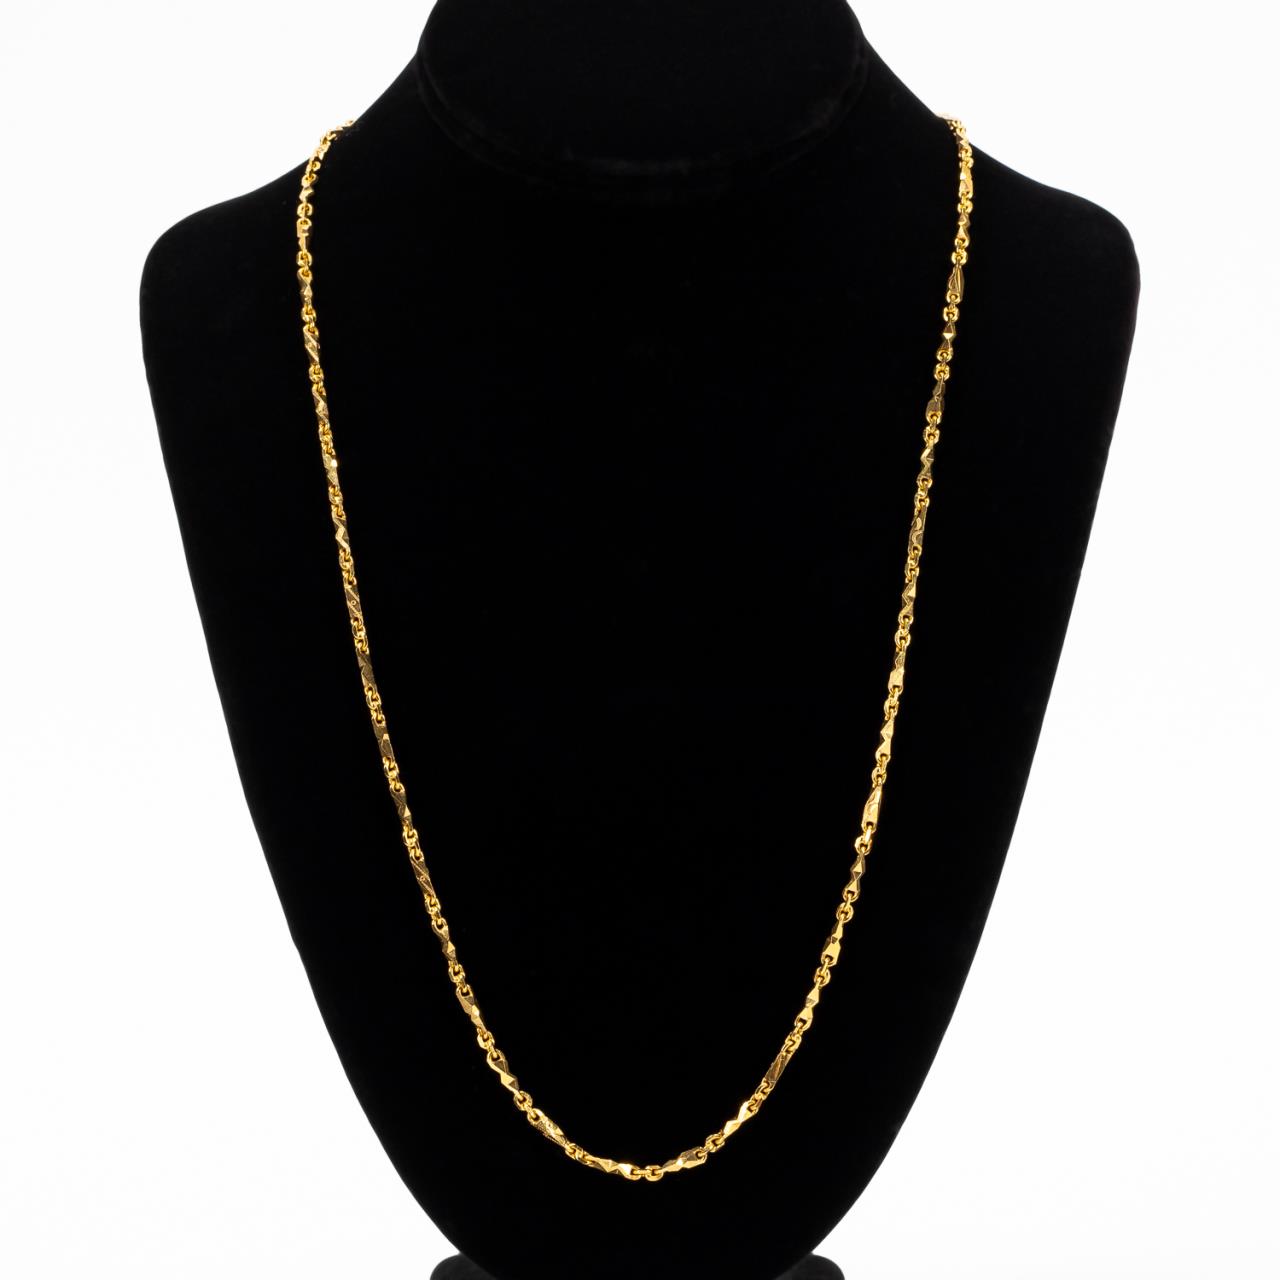 18K YELLOW GOLD 25 LINK BAR CHAIN  35ad11